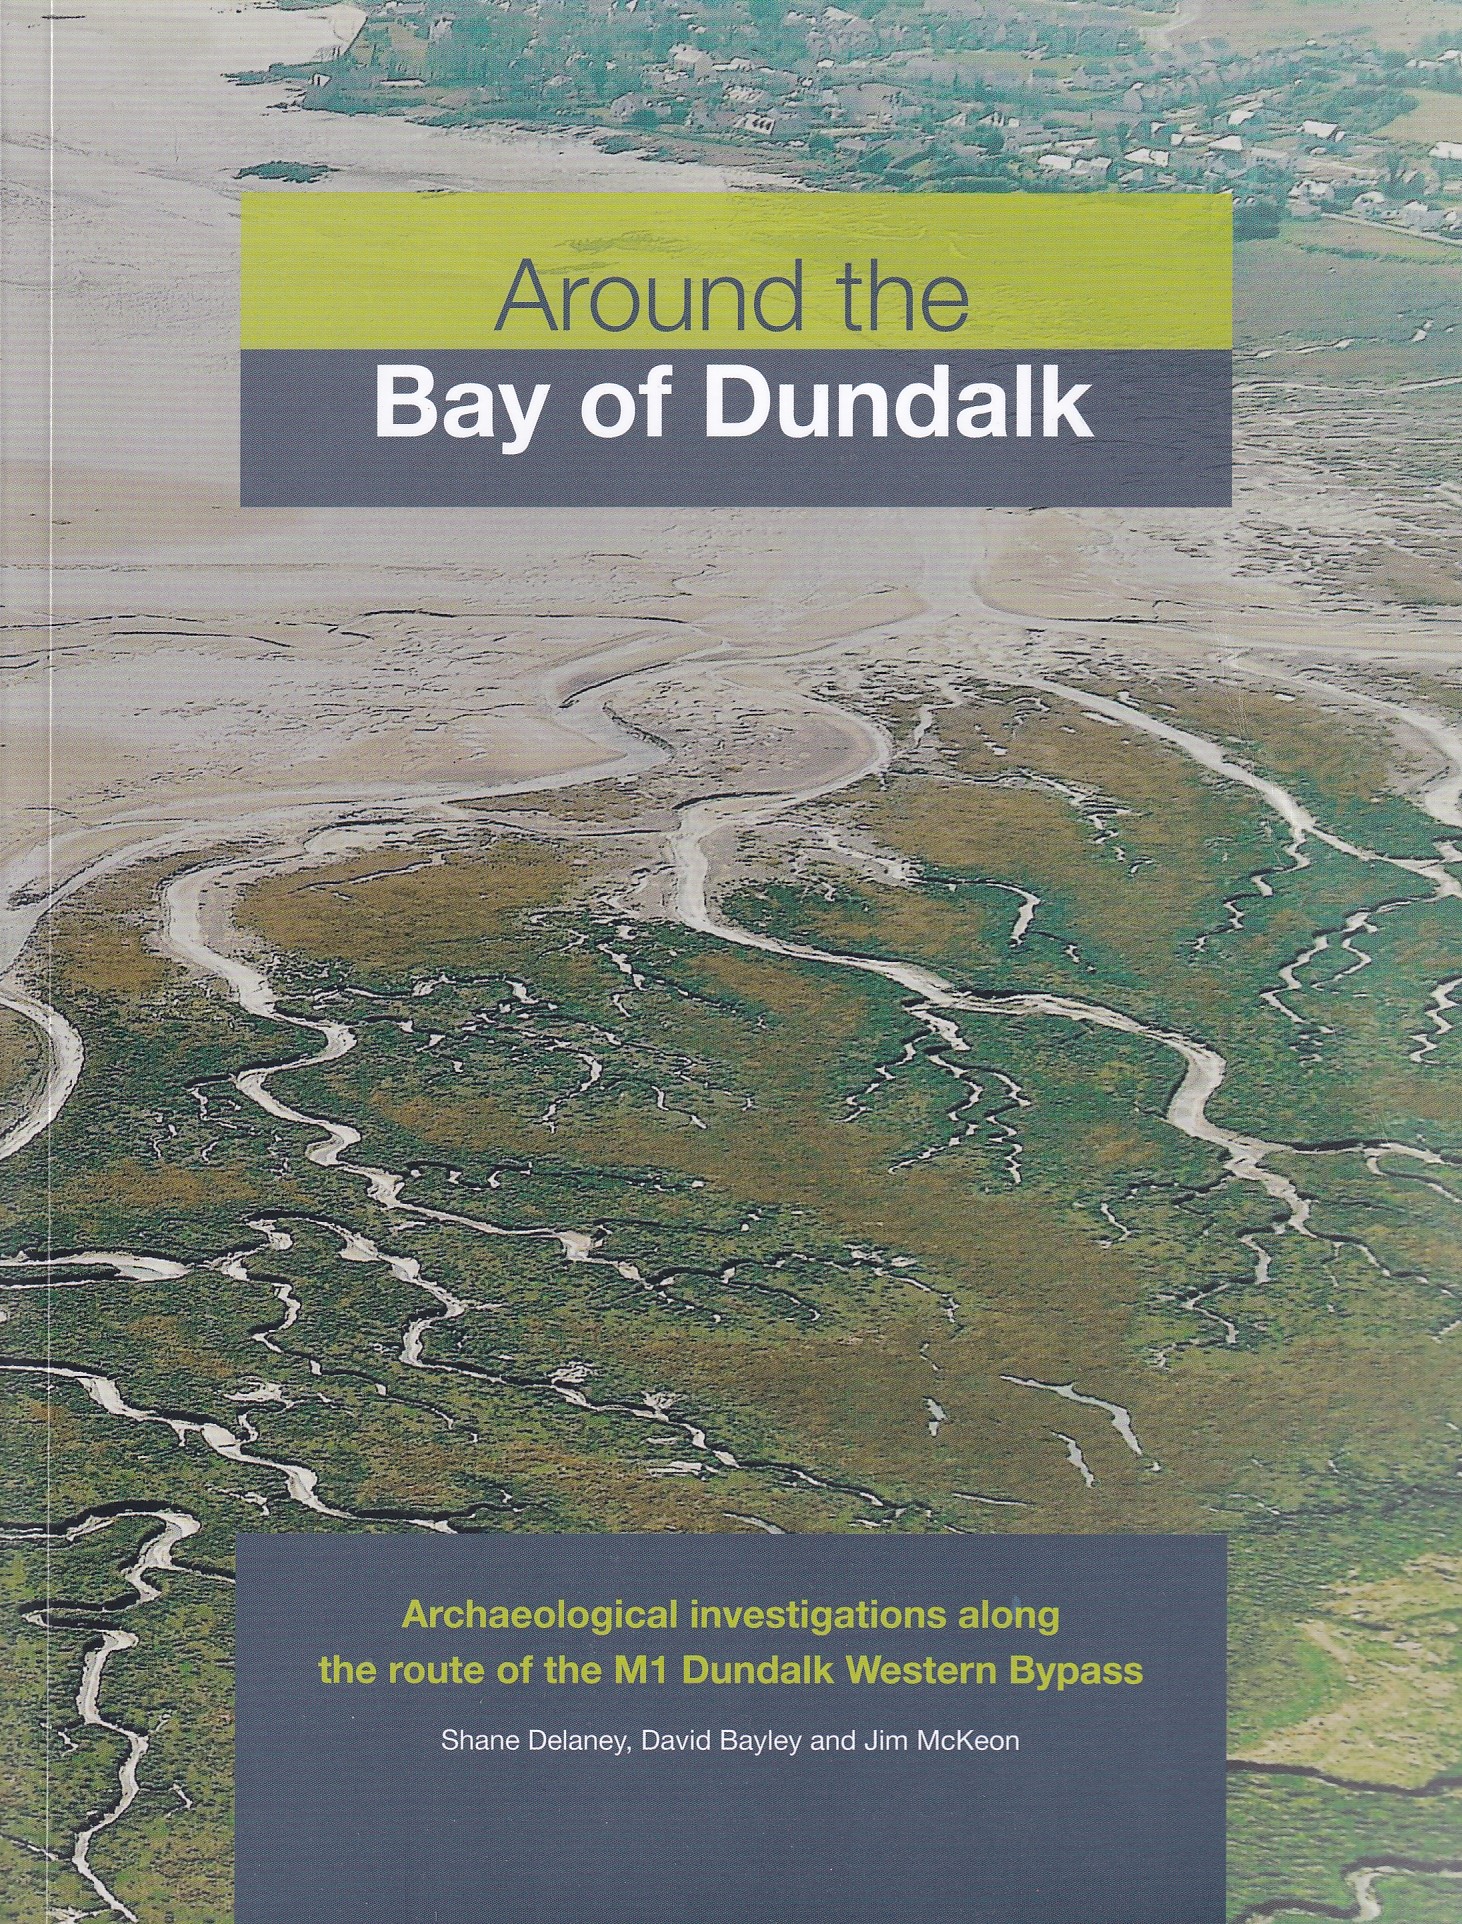 Around the Bay of Dundalk: Archaeological investigations along the route of the M1 Dundalk Western Bypass | Shane Delaney, David Bayley & Jim McKeon | Charlie Byrne's